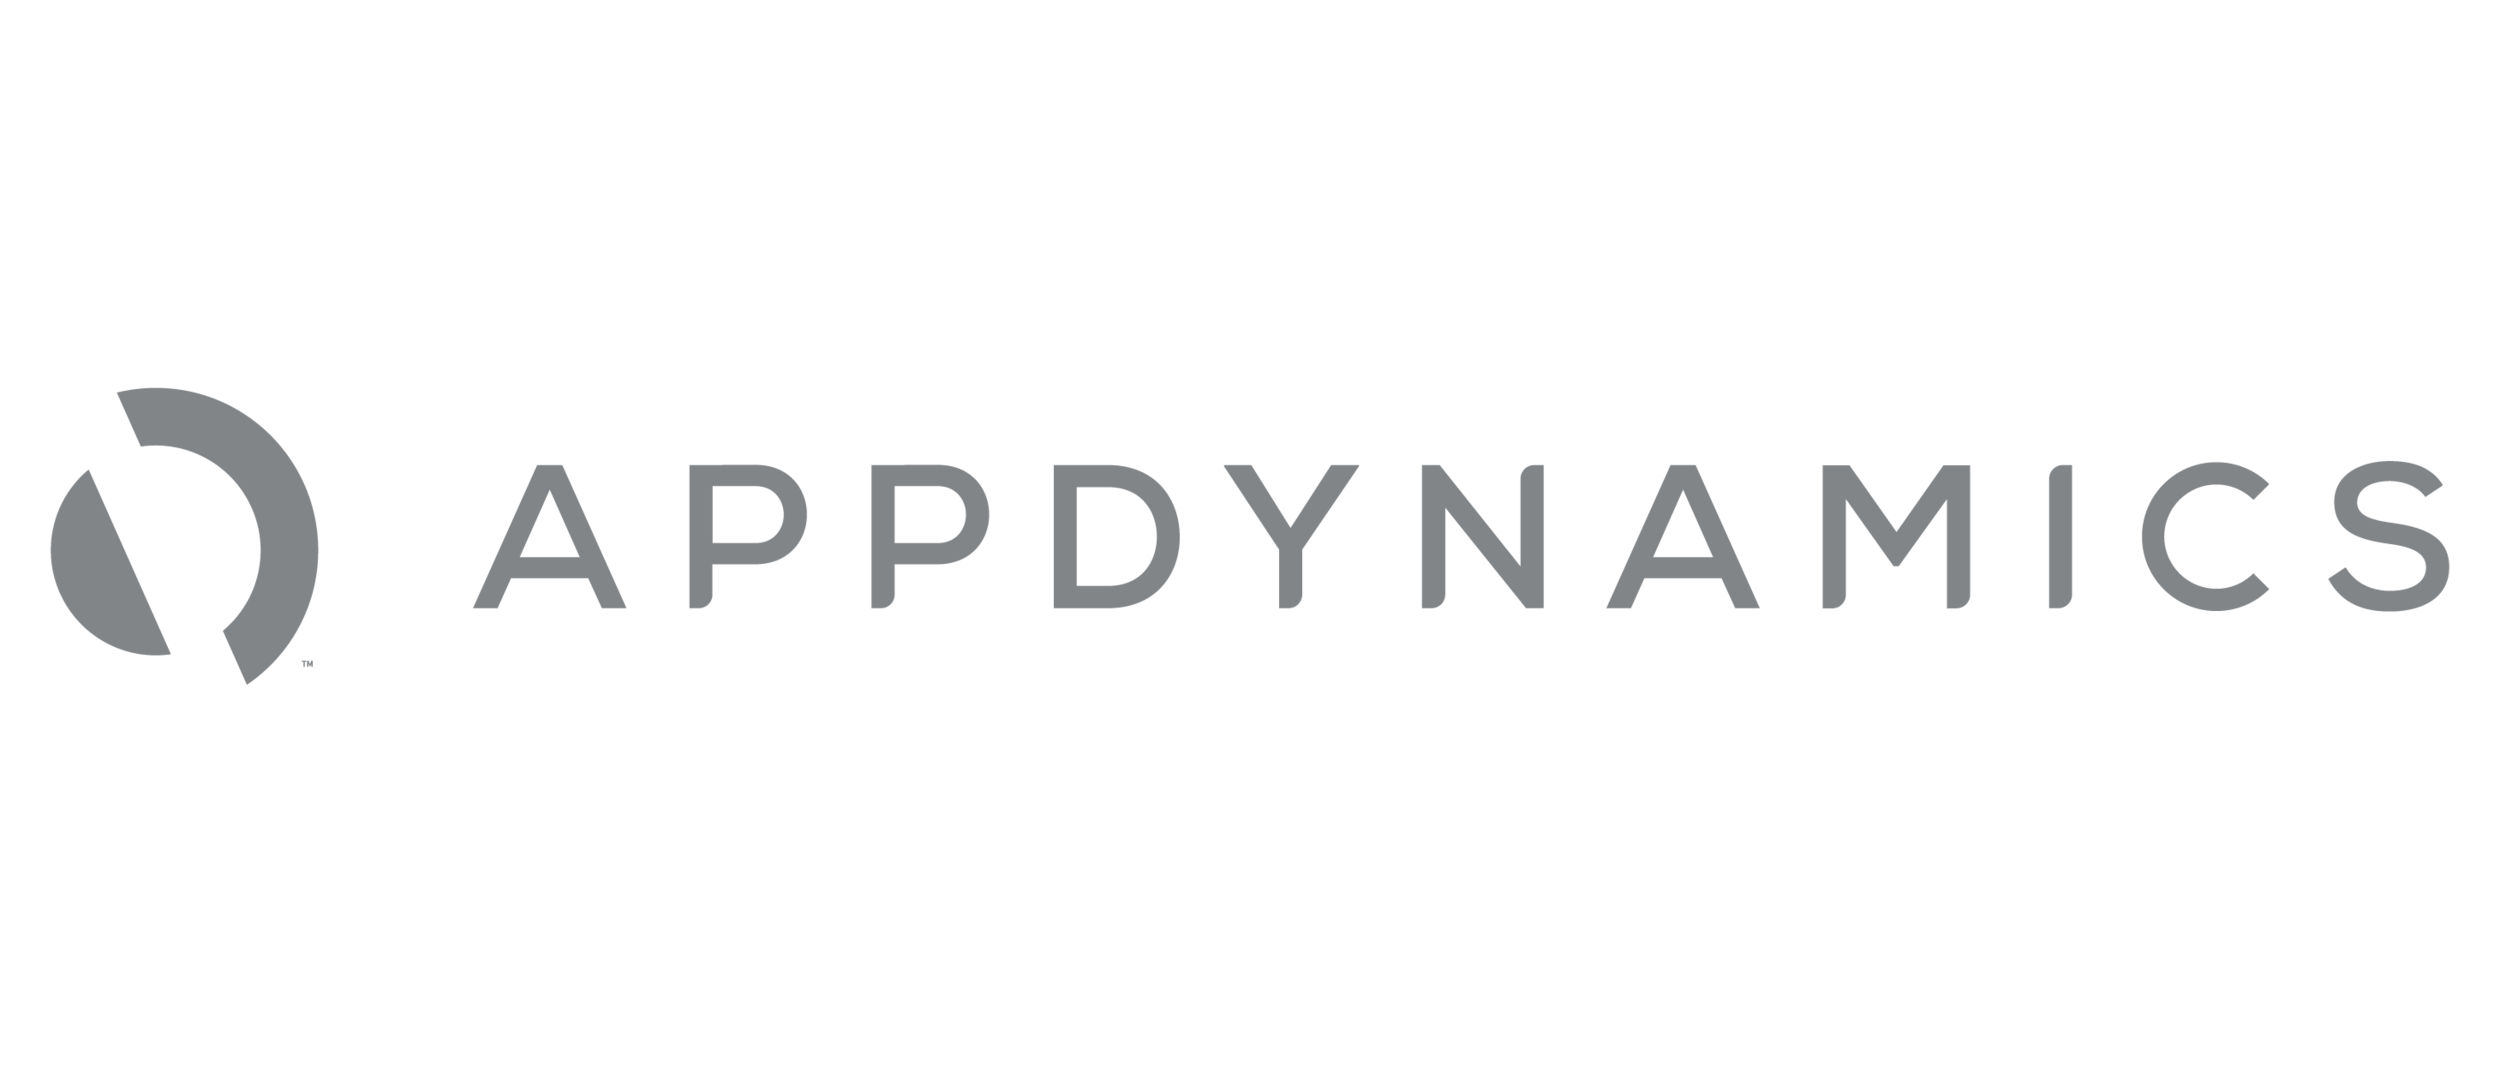 hard yards client logos_appdynamics.png